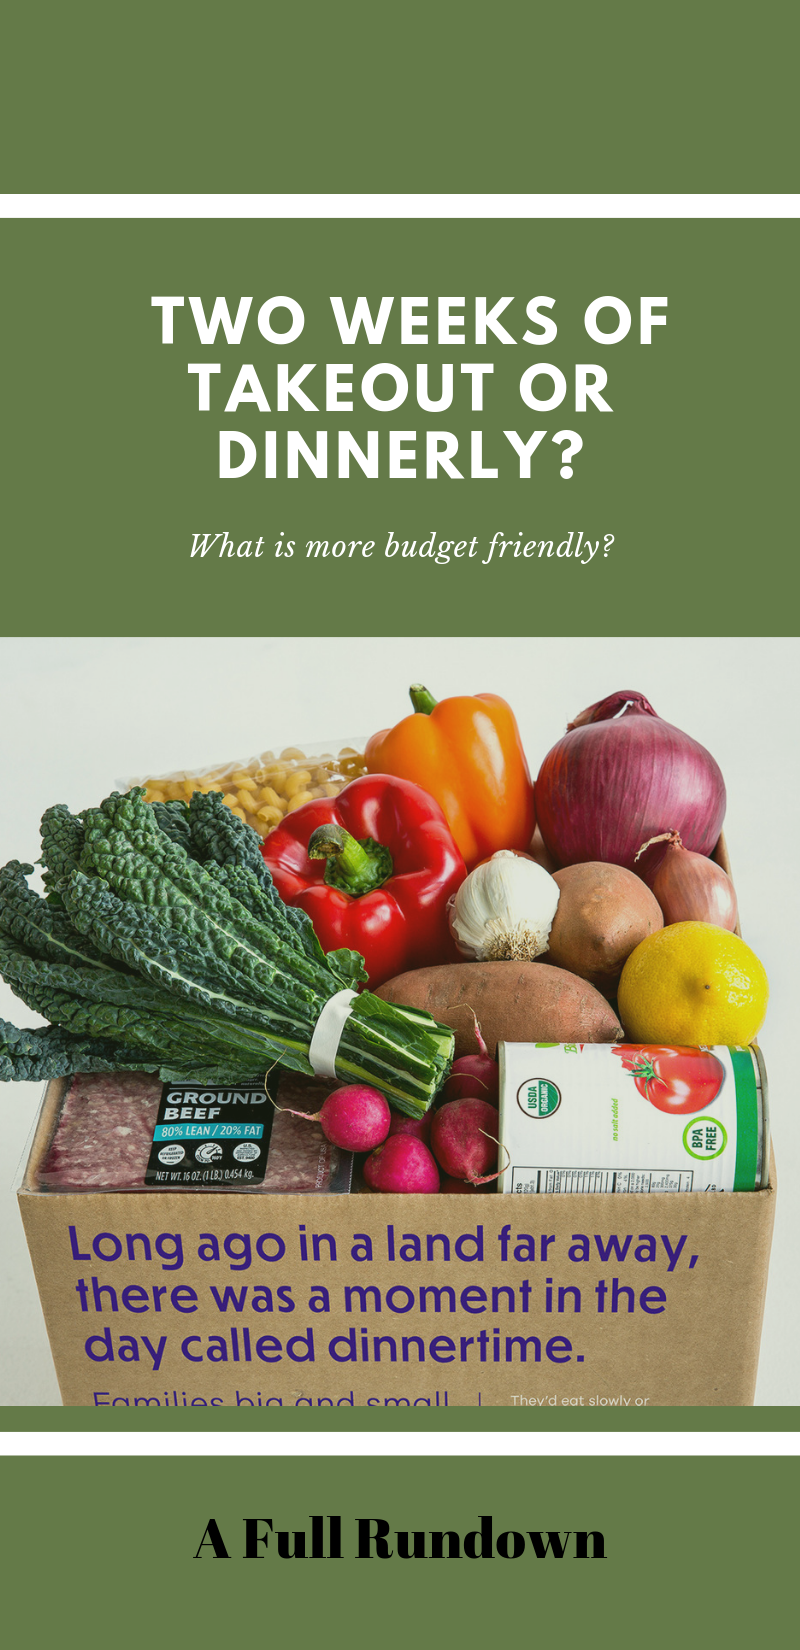 Dinnerly Review